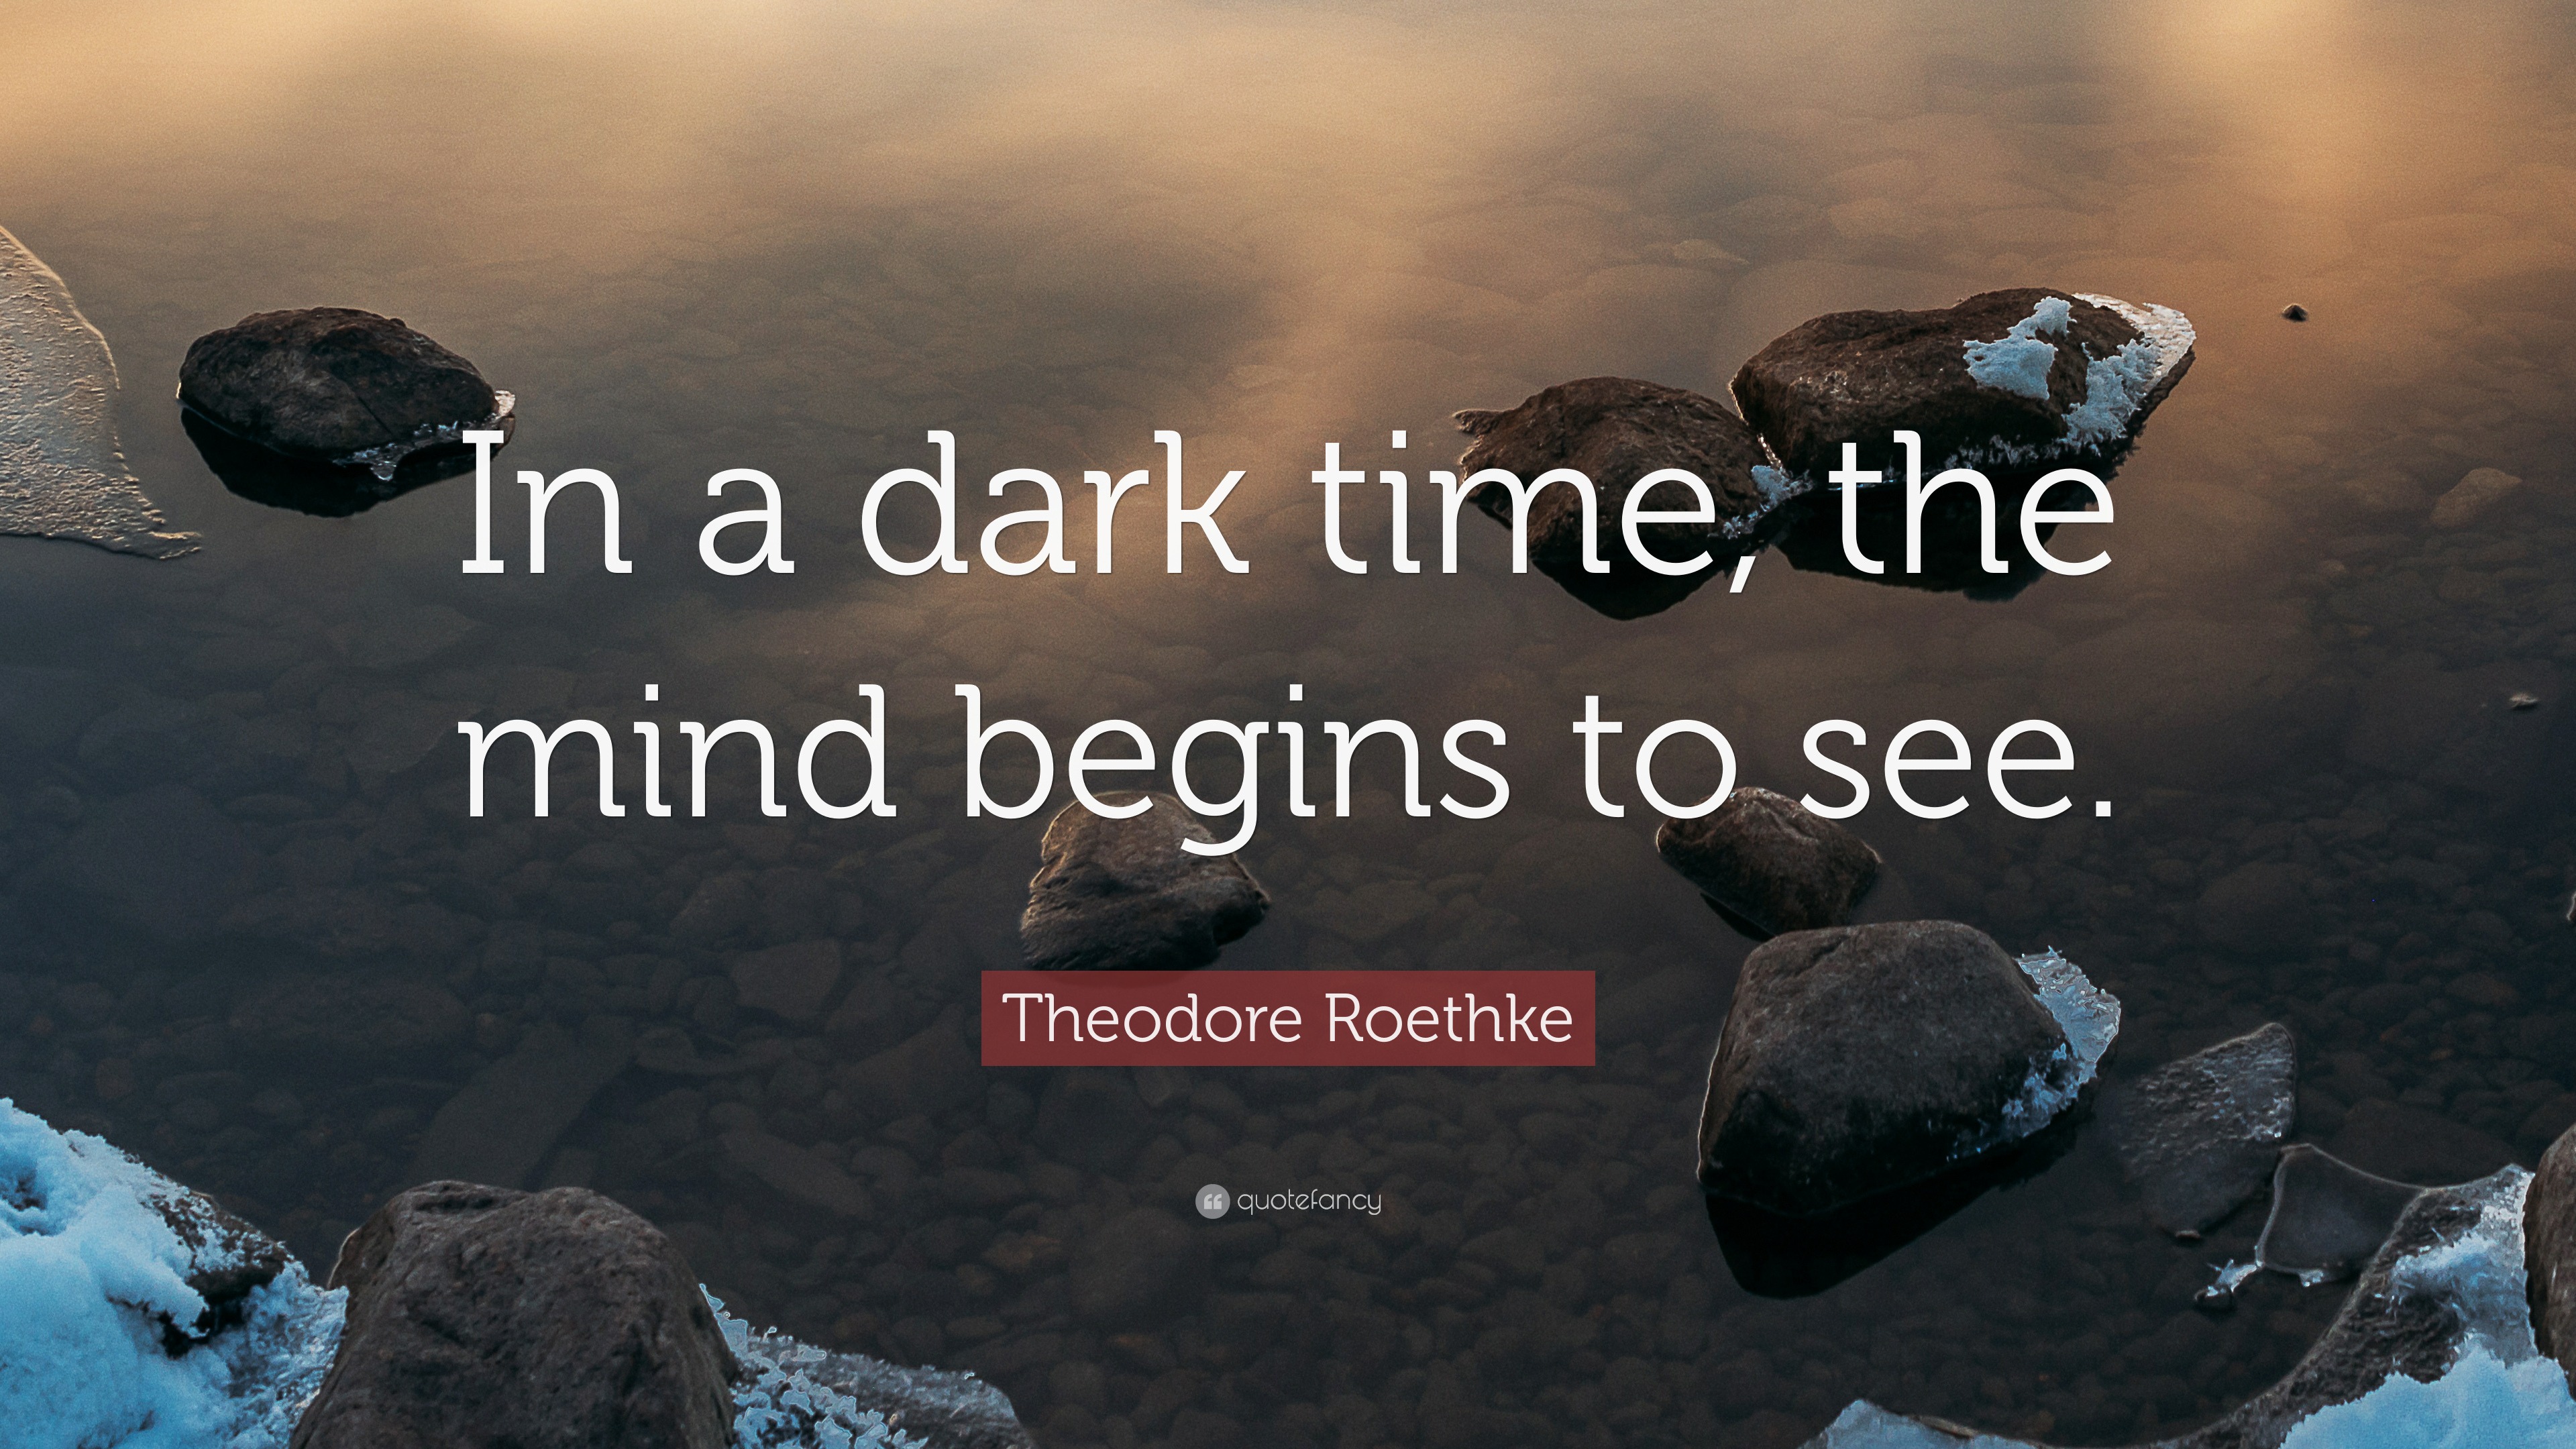 Theodore Roethke Quote In A Dark Time The Mind Begins To See 10 Wallpapers Quotefancy